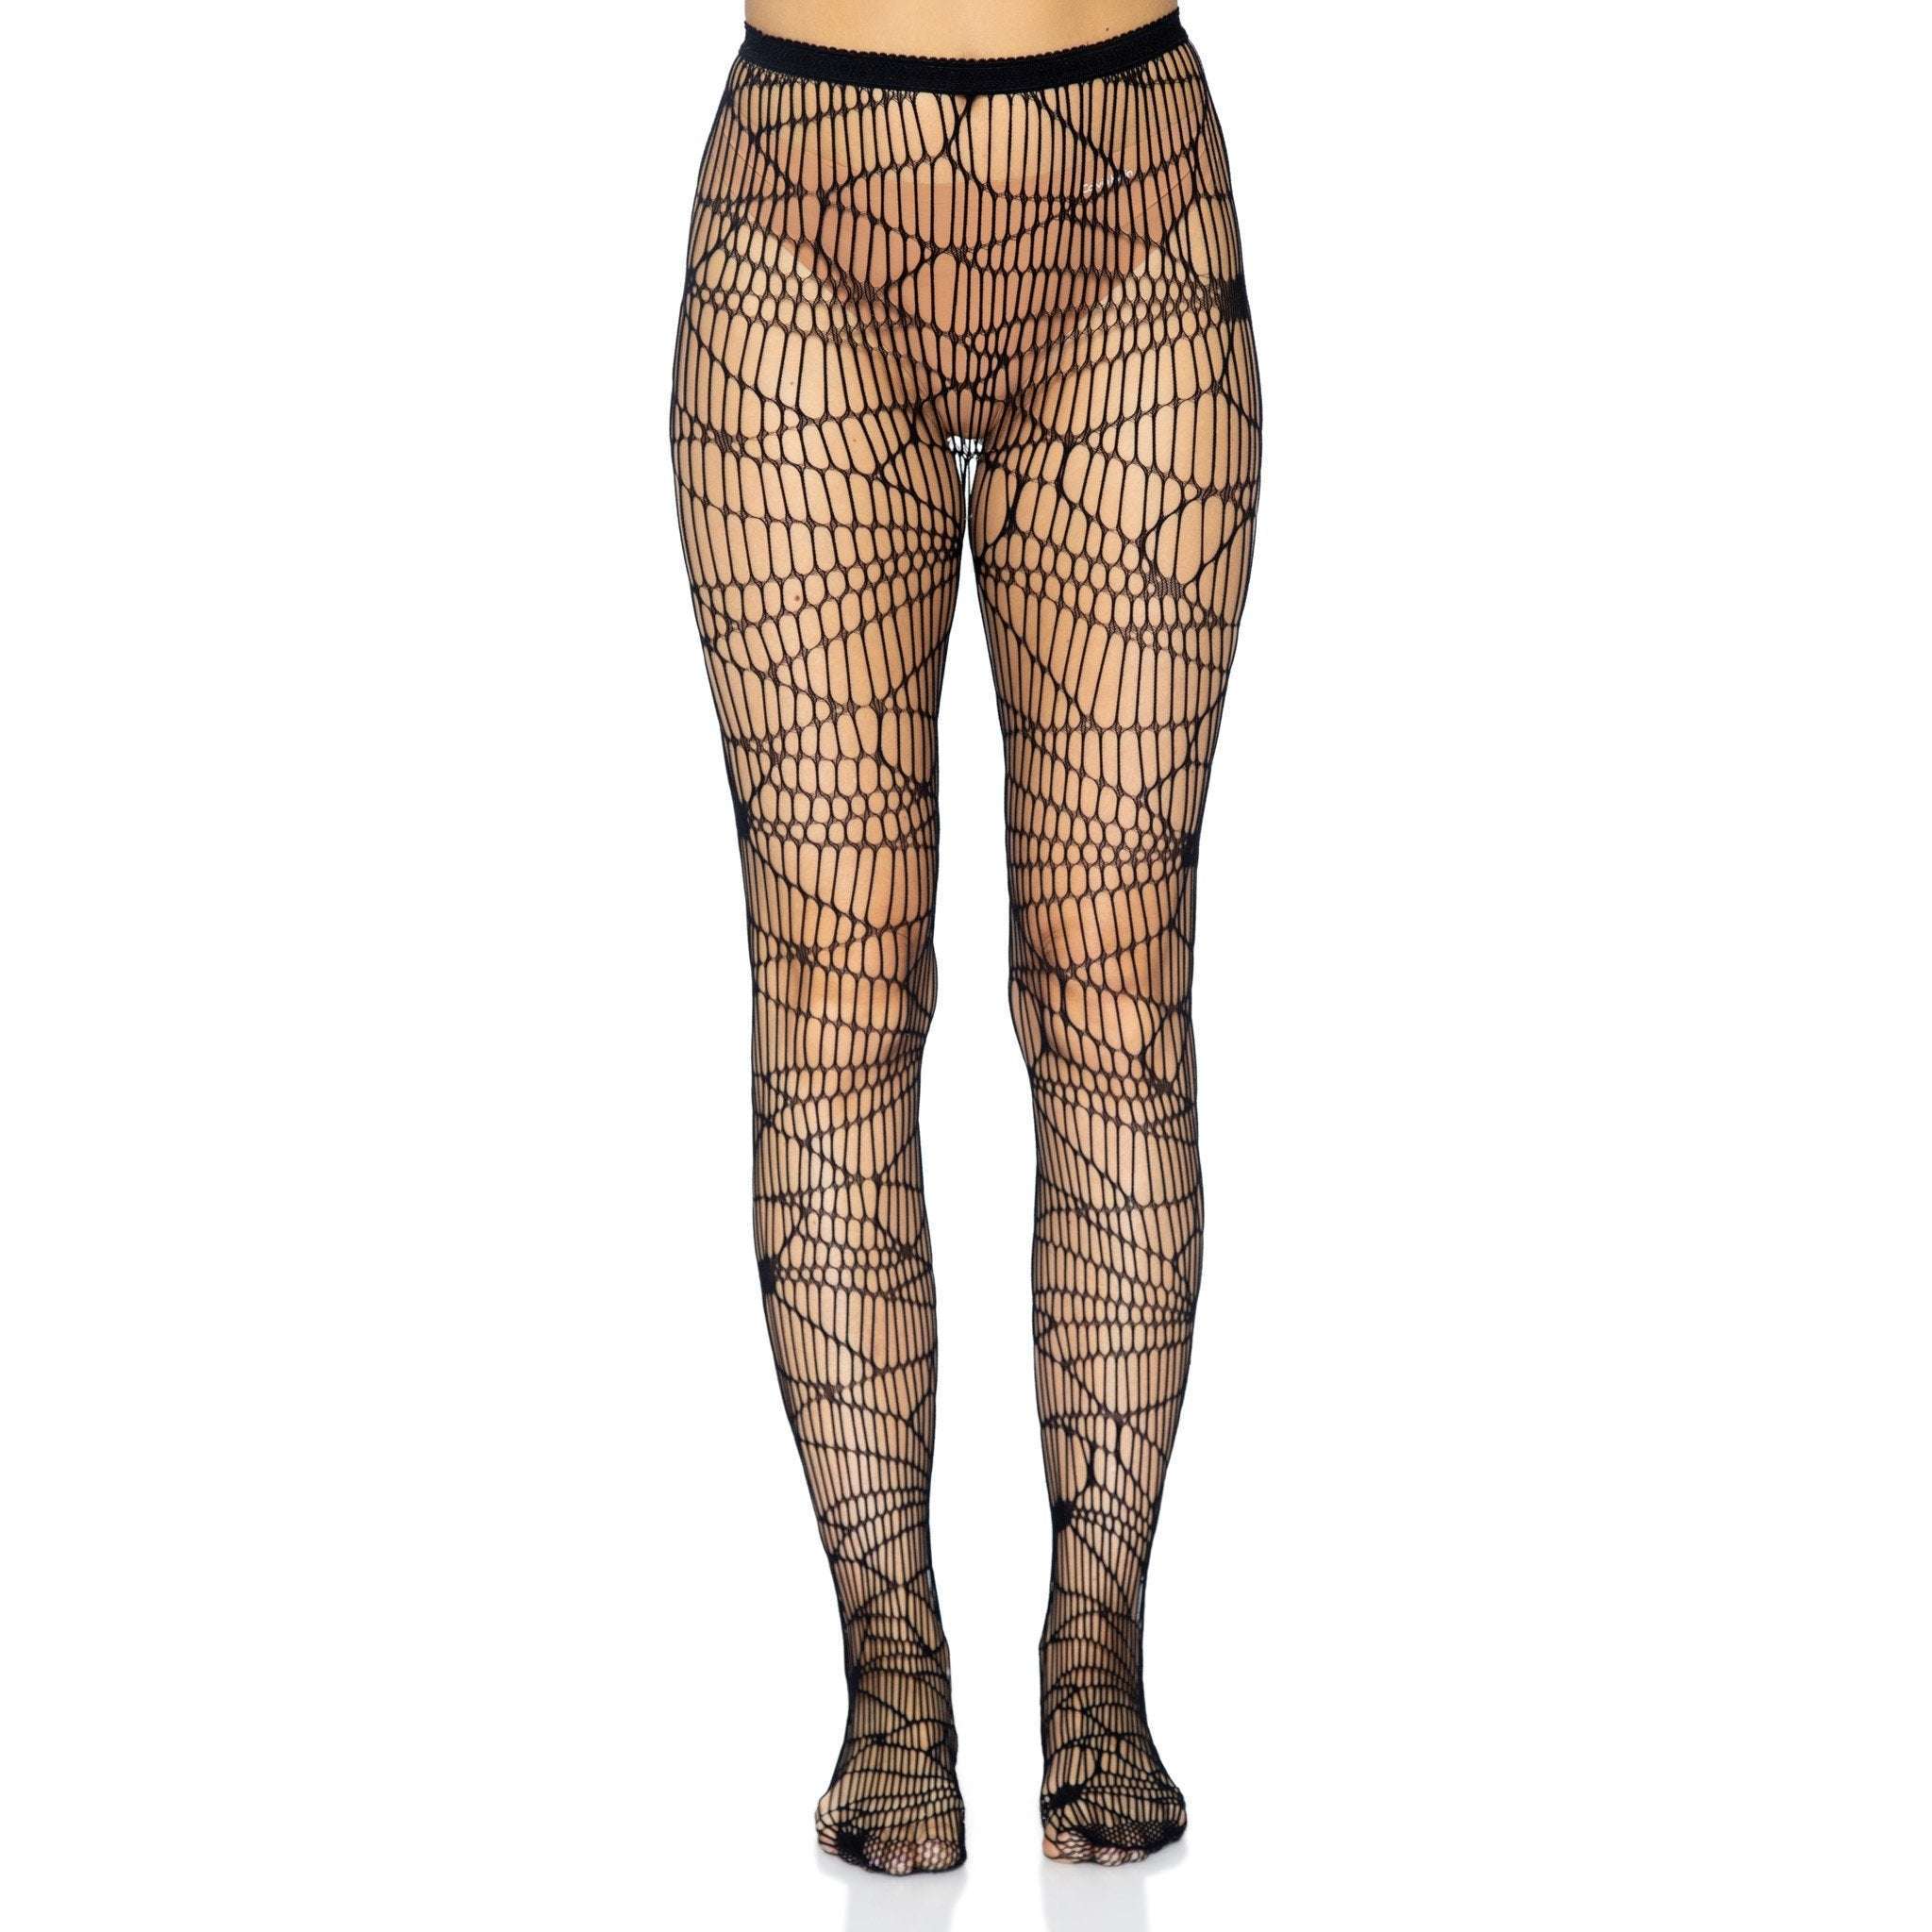 Barbed Wire Tattoo Black Gothic Tights - Gothic Tights